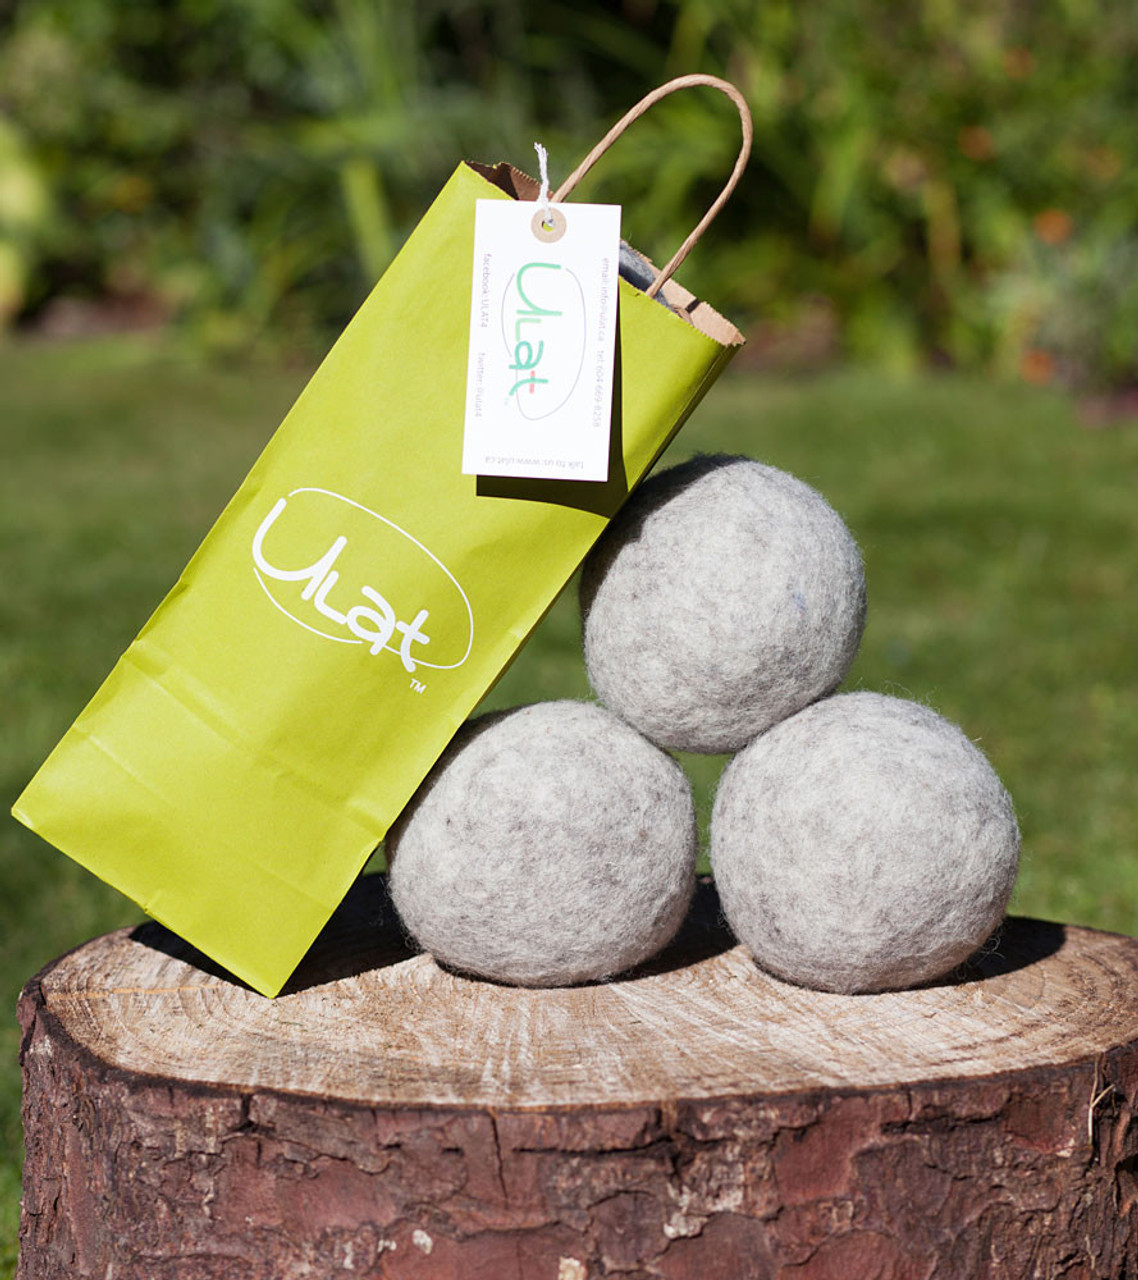 Essential Oils For Laundry Balls by Woolzies - Shop at Wealhouse Store